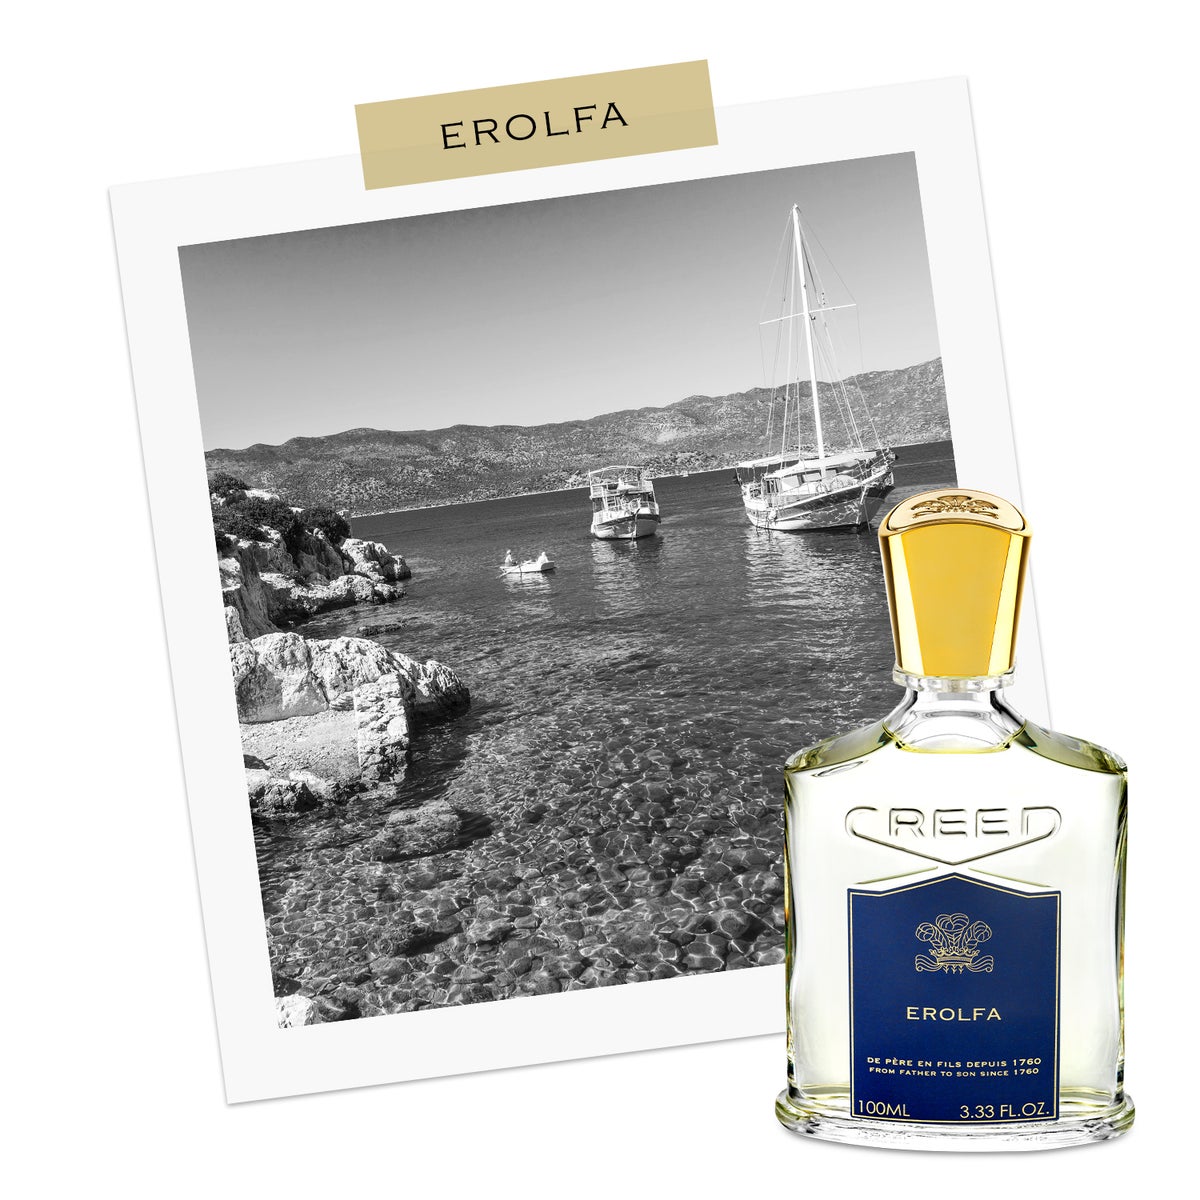 Erolfa bottle infront of black & white postcard of yachts sailing in the Mediterranean Sea